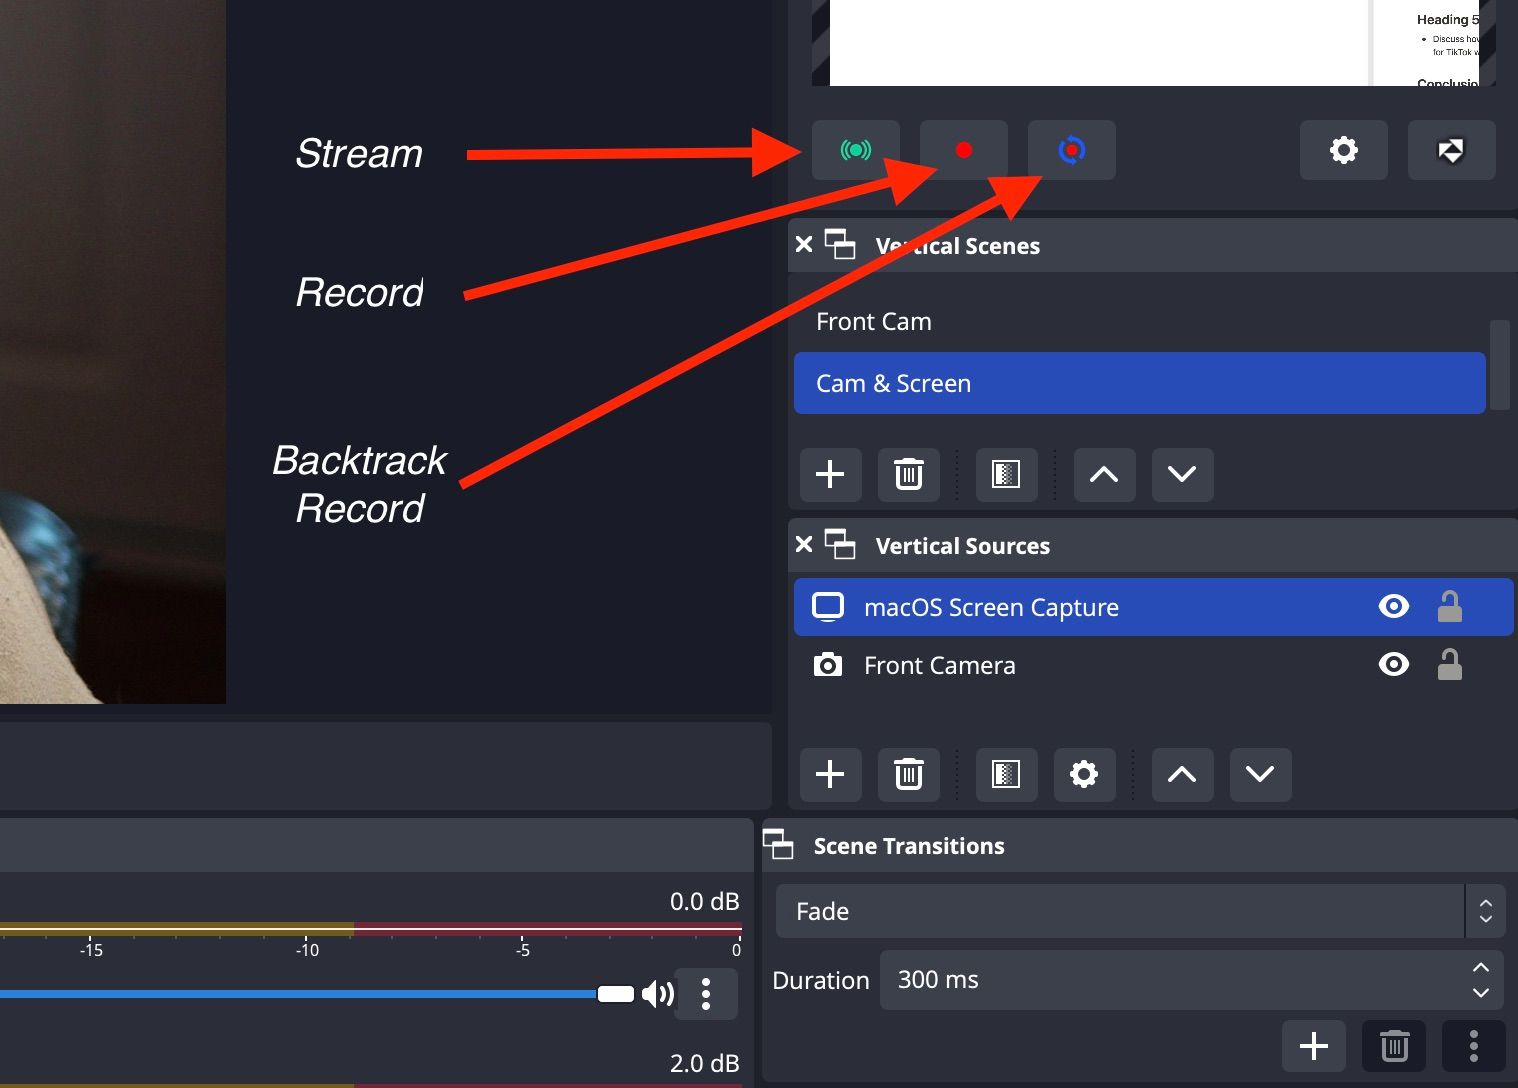 Arrows pointing to the streaming, recording, and bacvtrack recording buttons